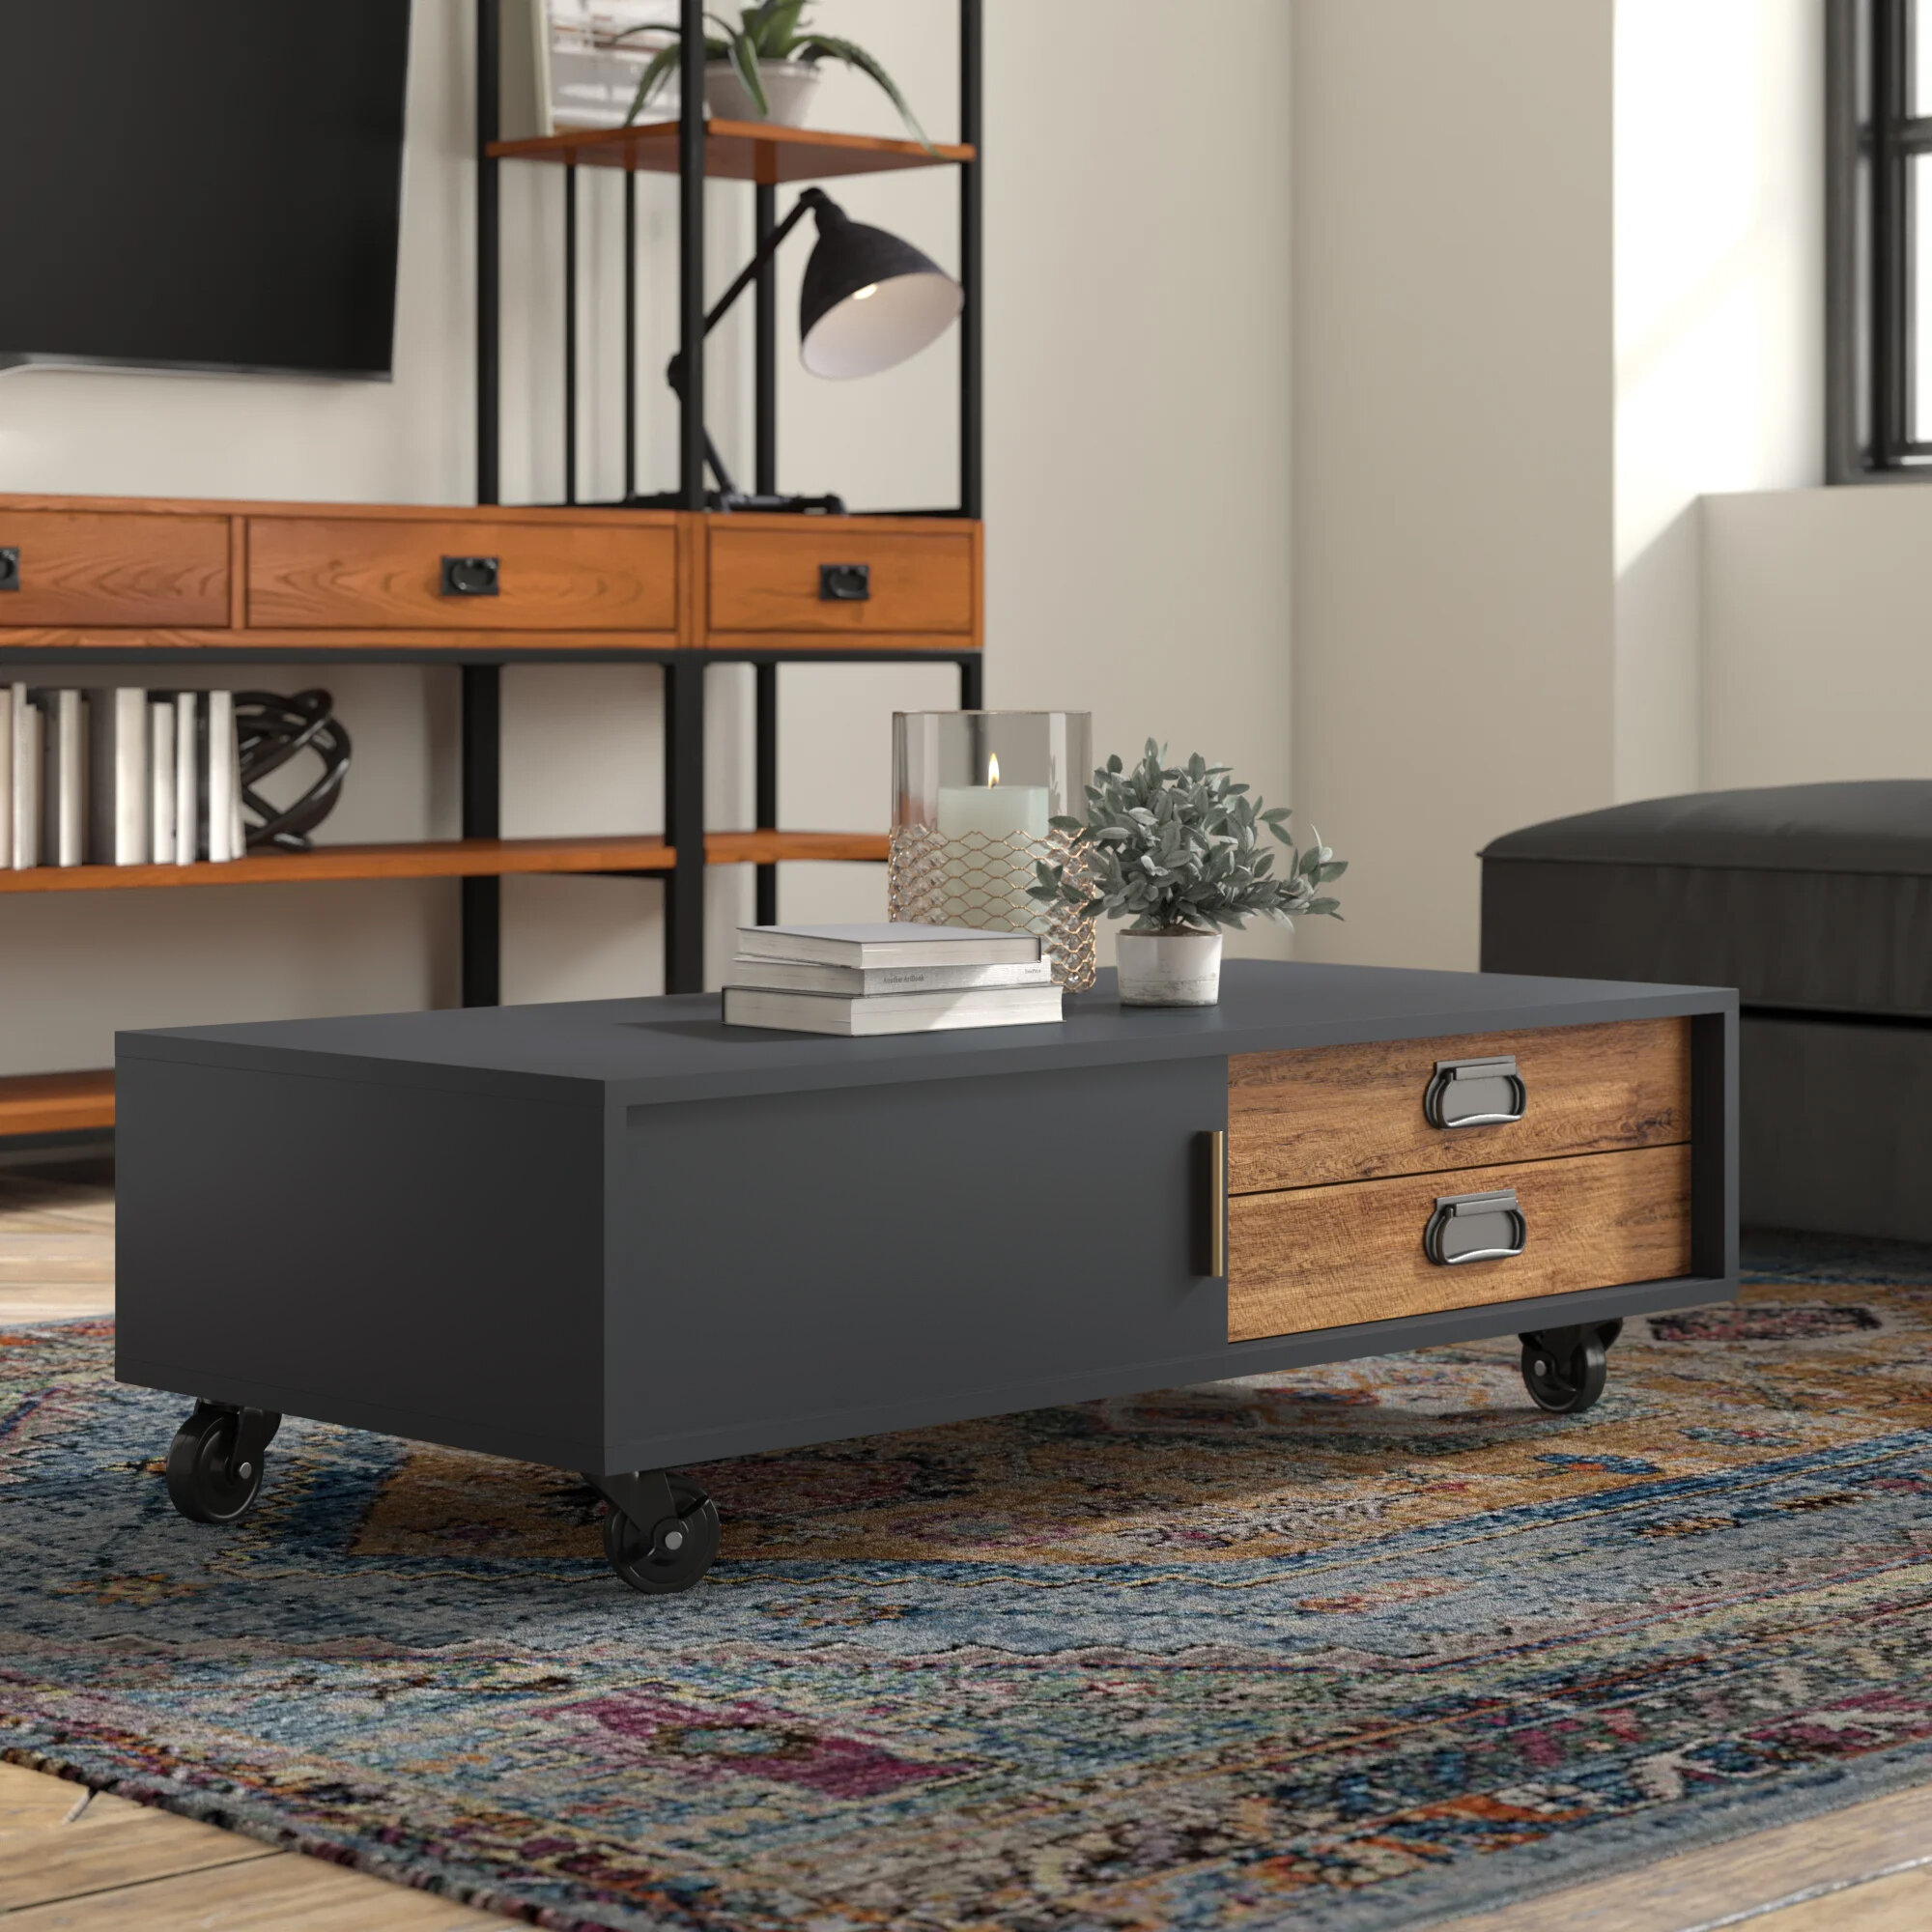 18 Stunning Coffee Tables With Built-in Storage - Living in a shoebox